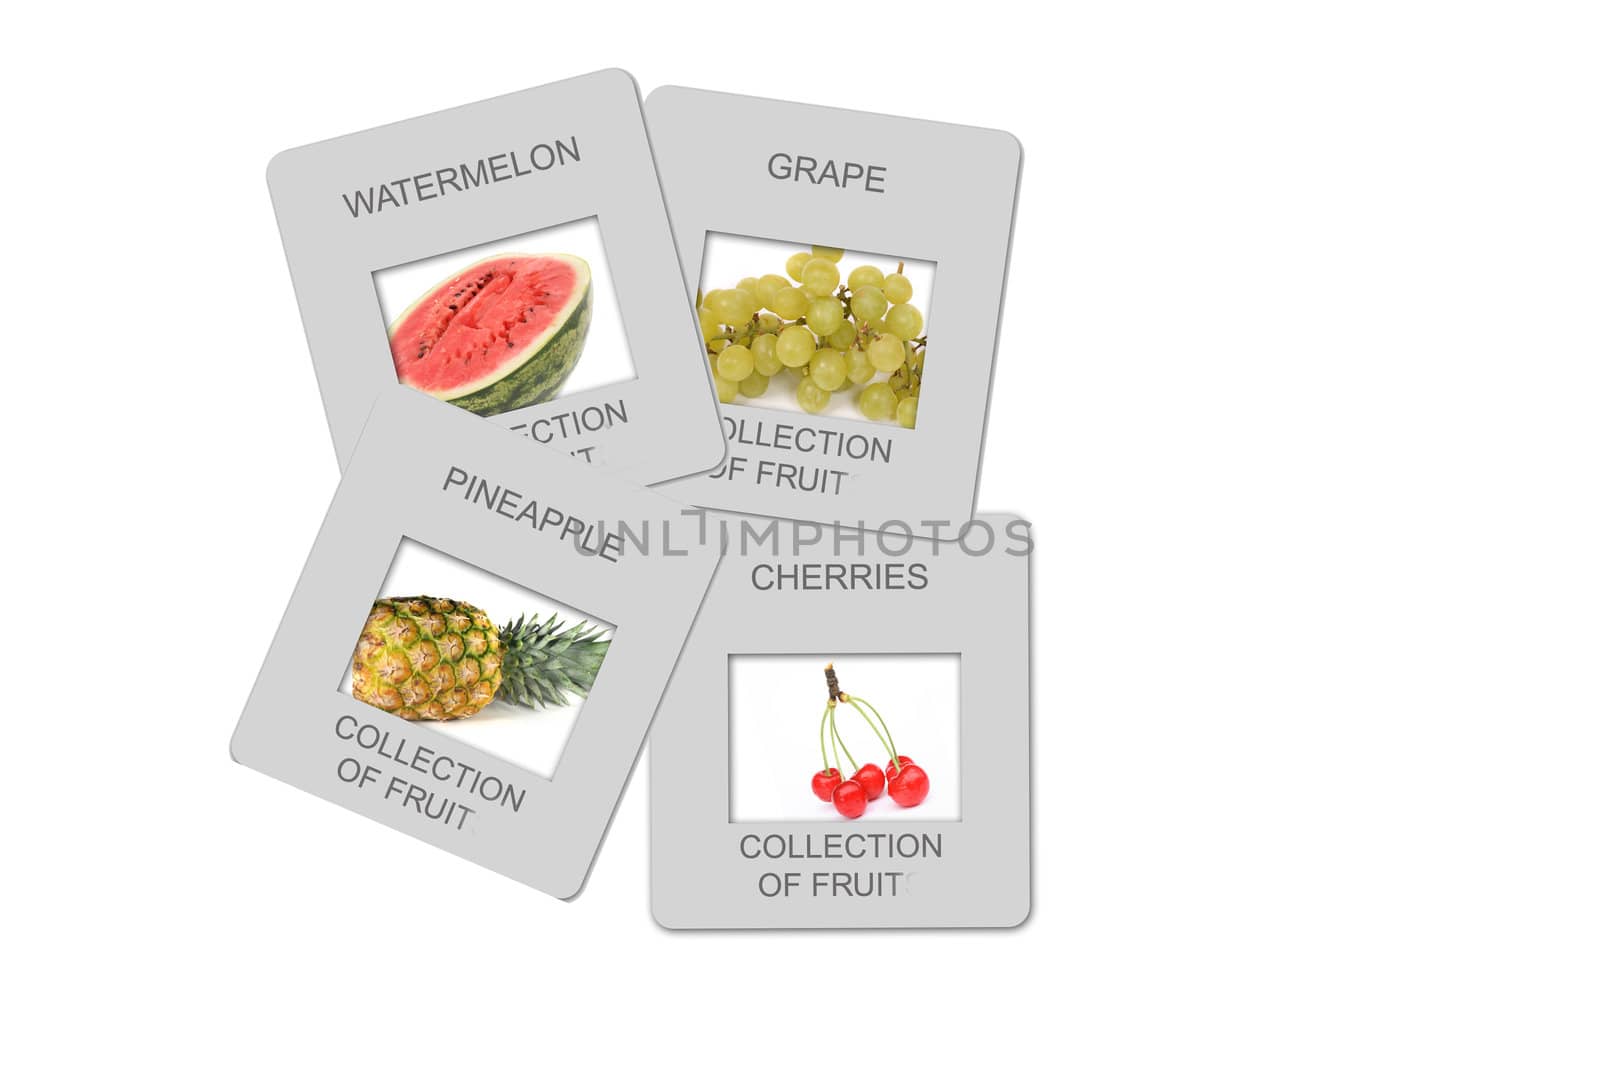 small pictures of the different fruits on the white background